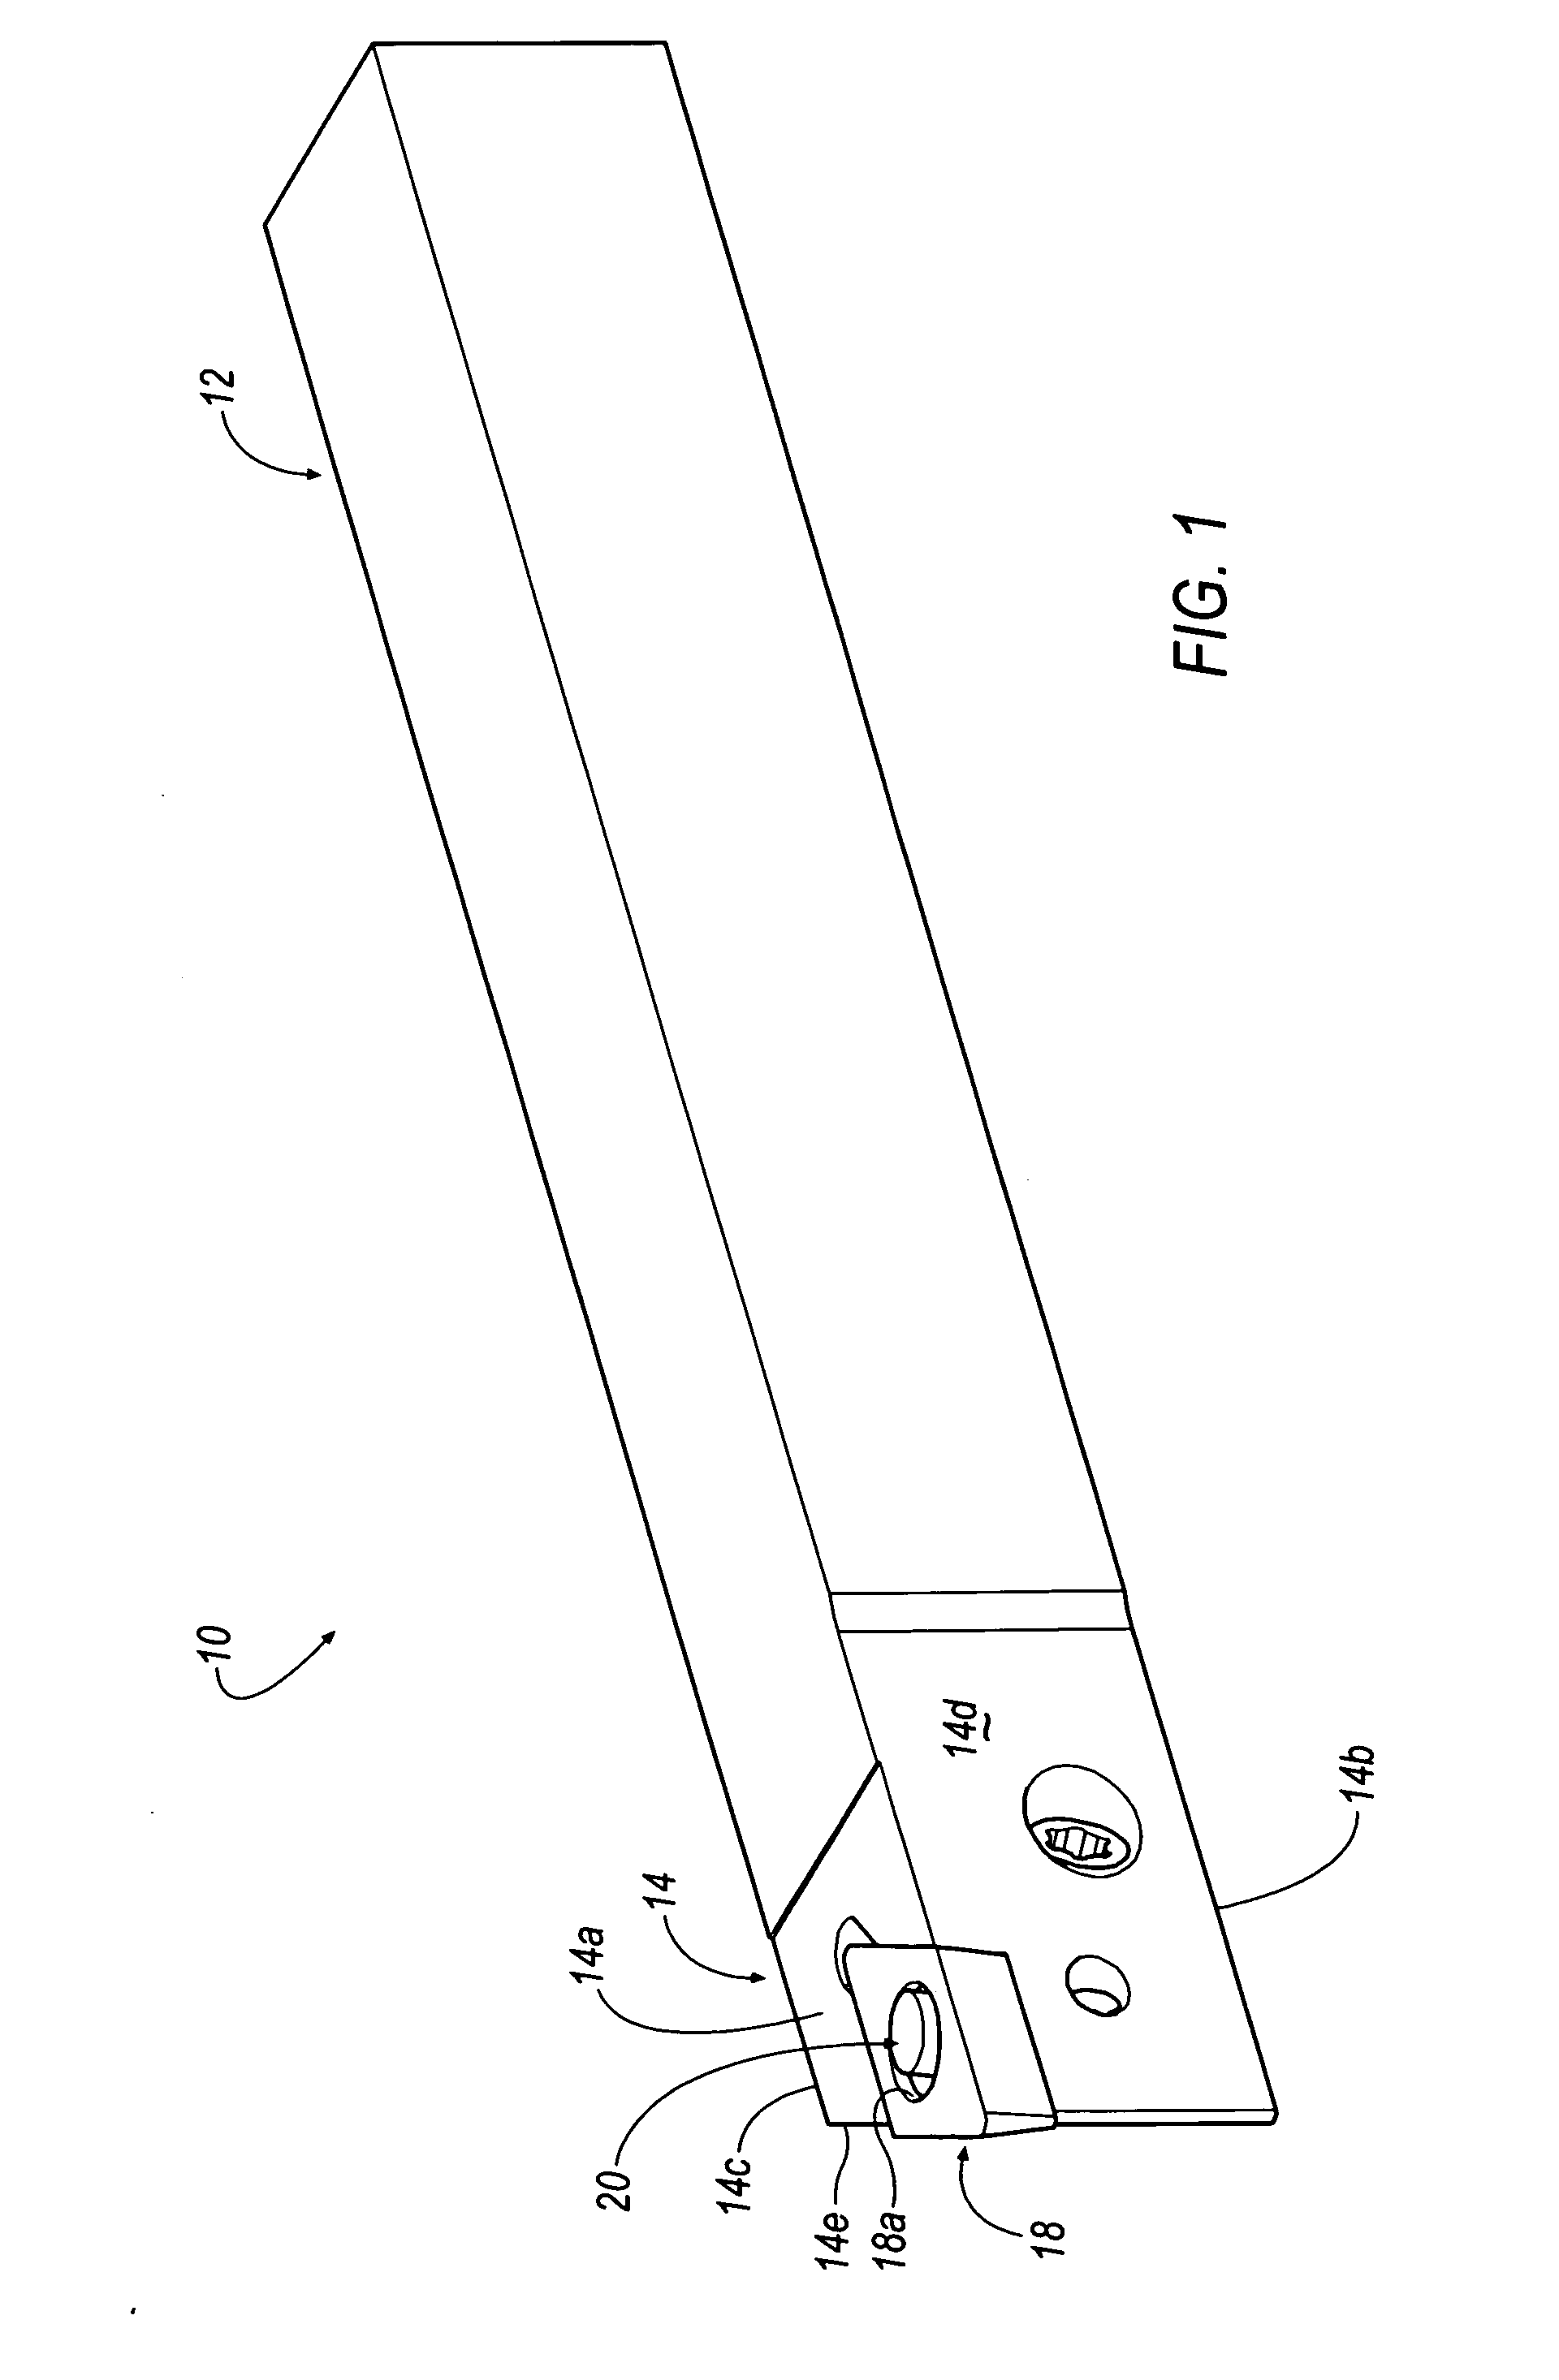 Tool holder with spherical contact points